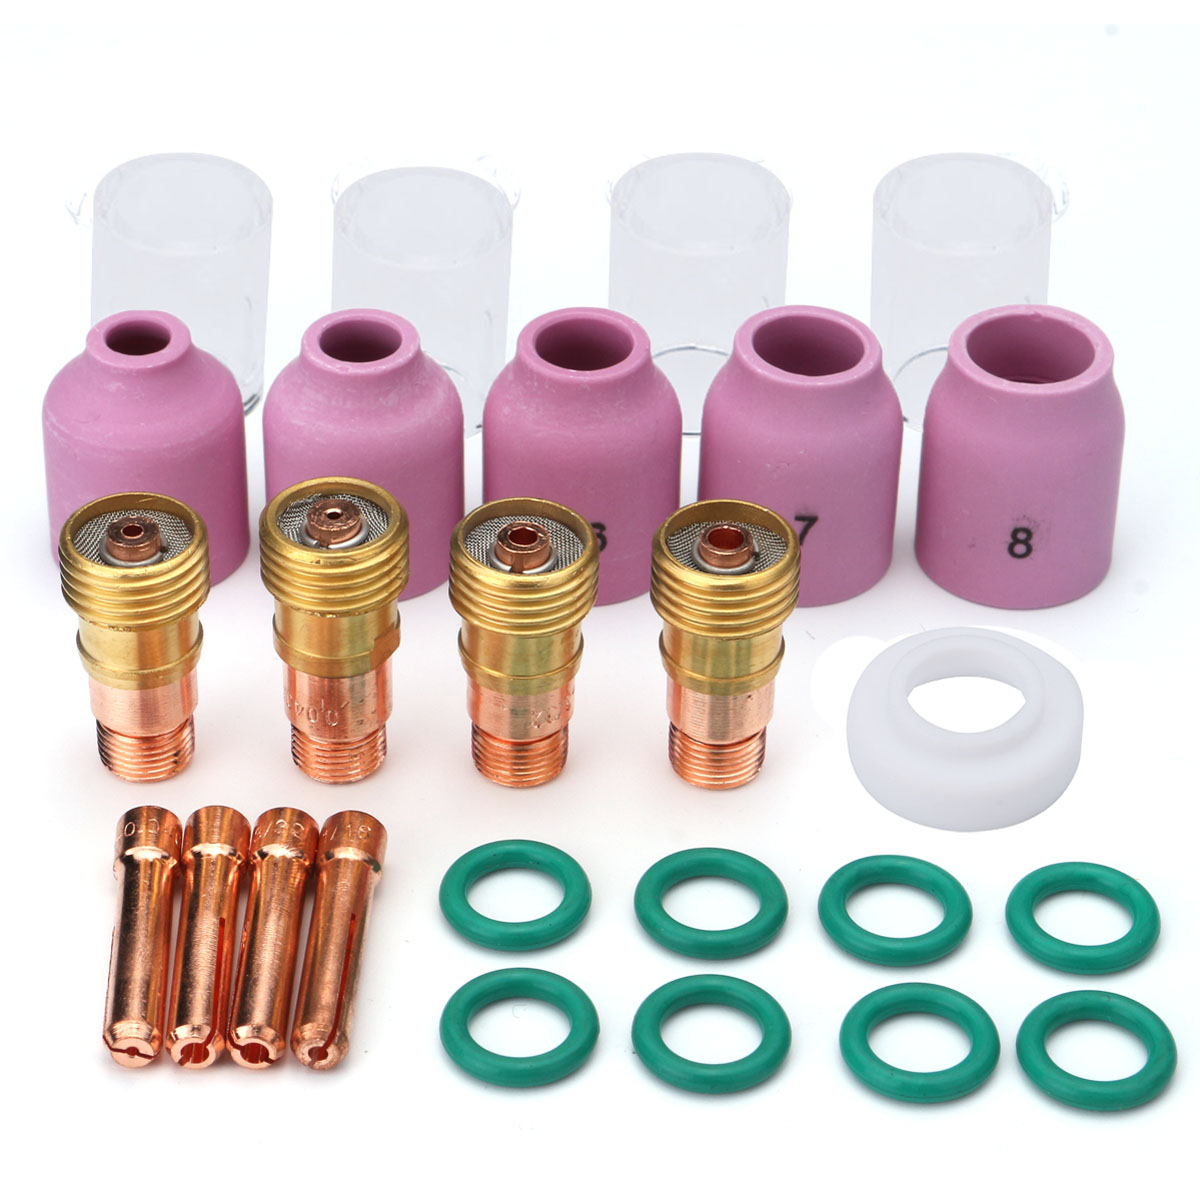 

26Pcs TIG Welding Torch Stubby Gas Lens #10 Pyrex Cup Kit for Tig WP-17/18/26 Torch